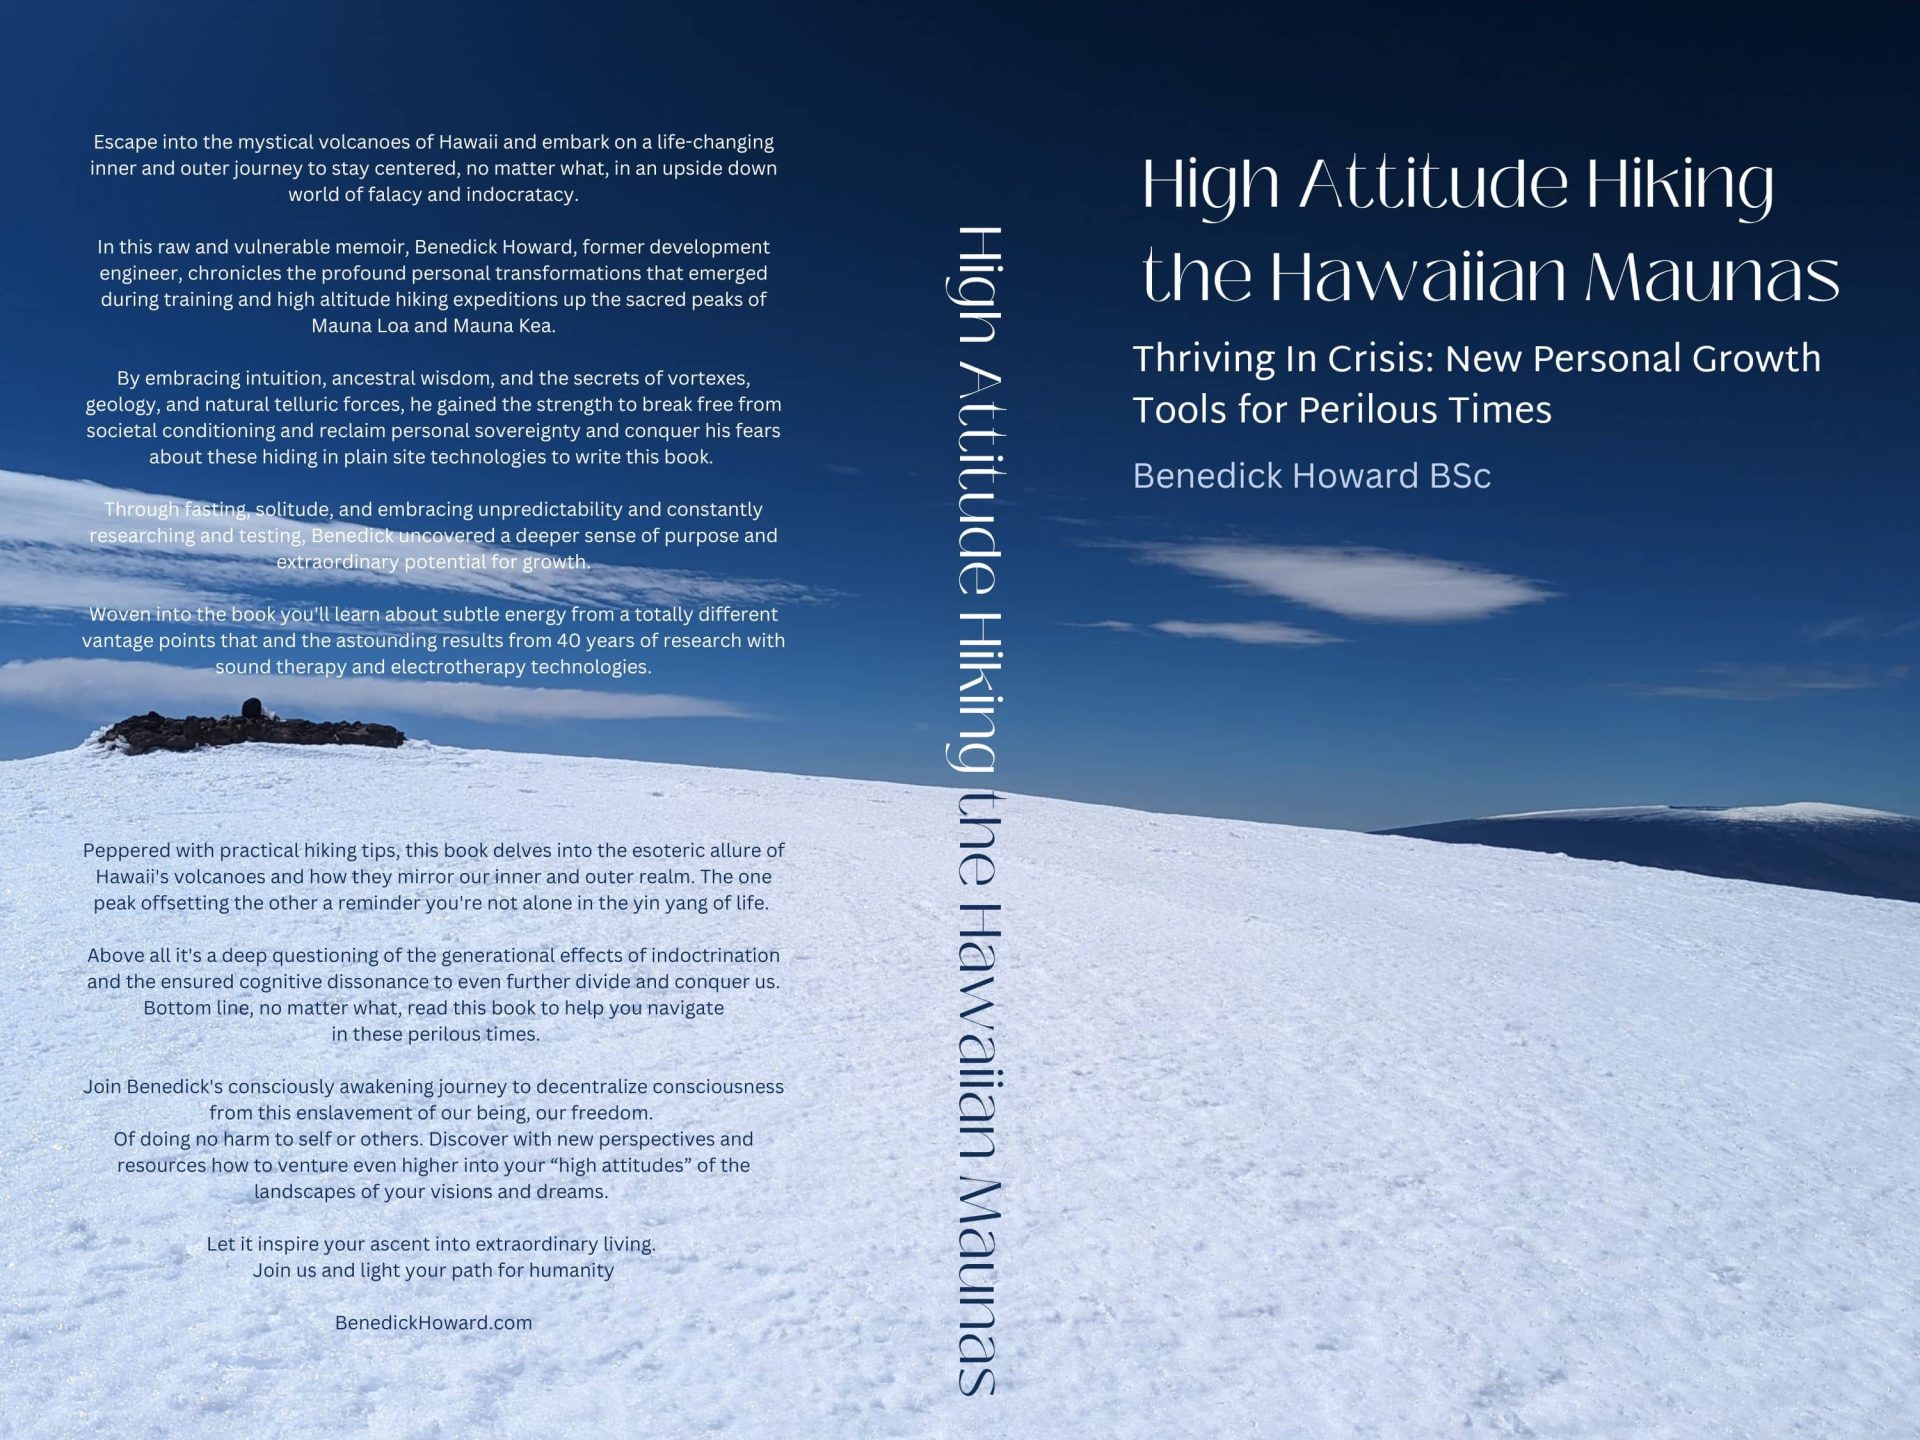 Front and back cover of the book High Attitude Hiking the Hawaiian Maunas. On a background photo of MaunaKea summit in the foreground and MaunaLoa summit in the distance.